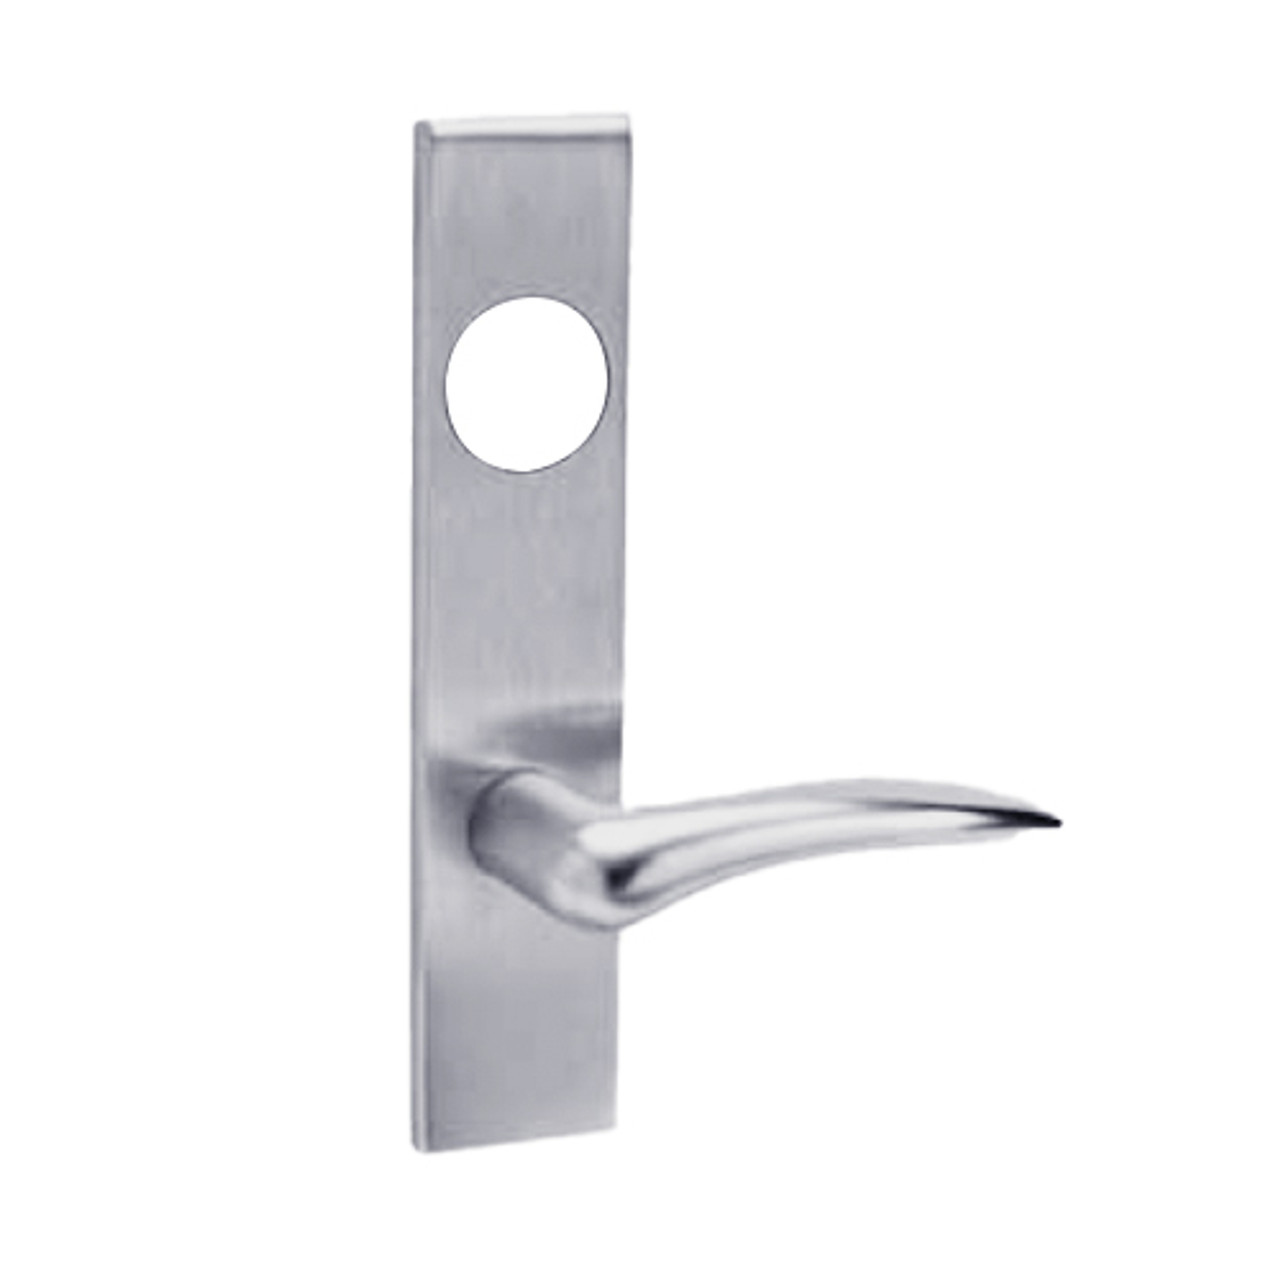 ML2032-DSR-626-LH-M31 Corbin Russwin ML2000 Series Mortise Institution Trim Pack with Dirke Lever in Satin Chrome